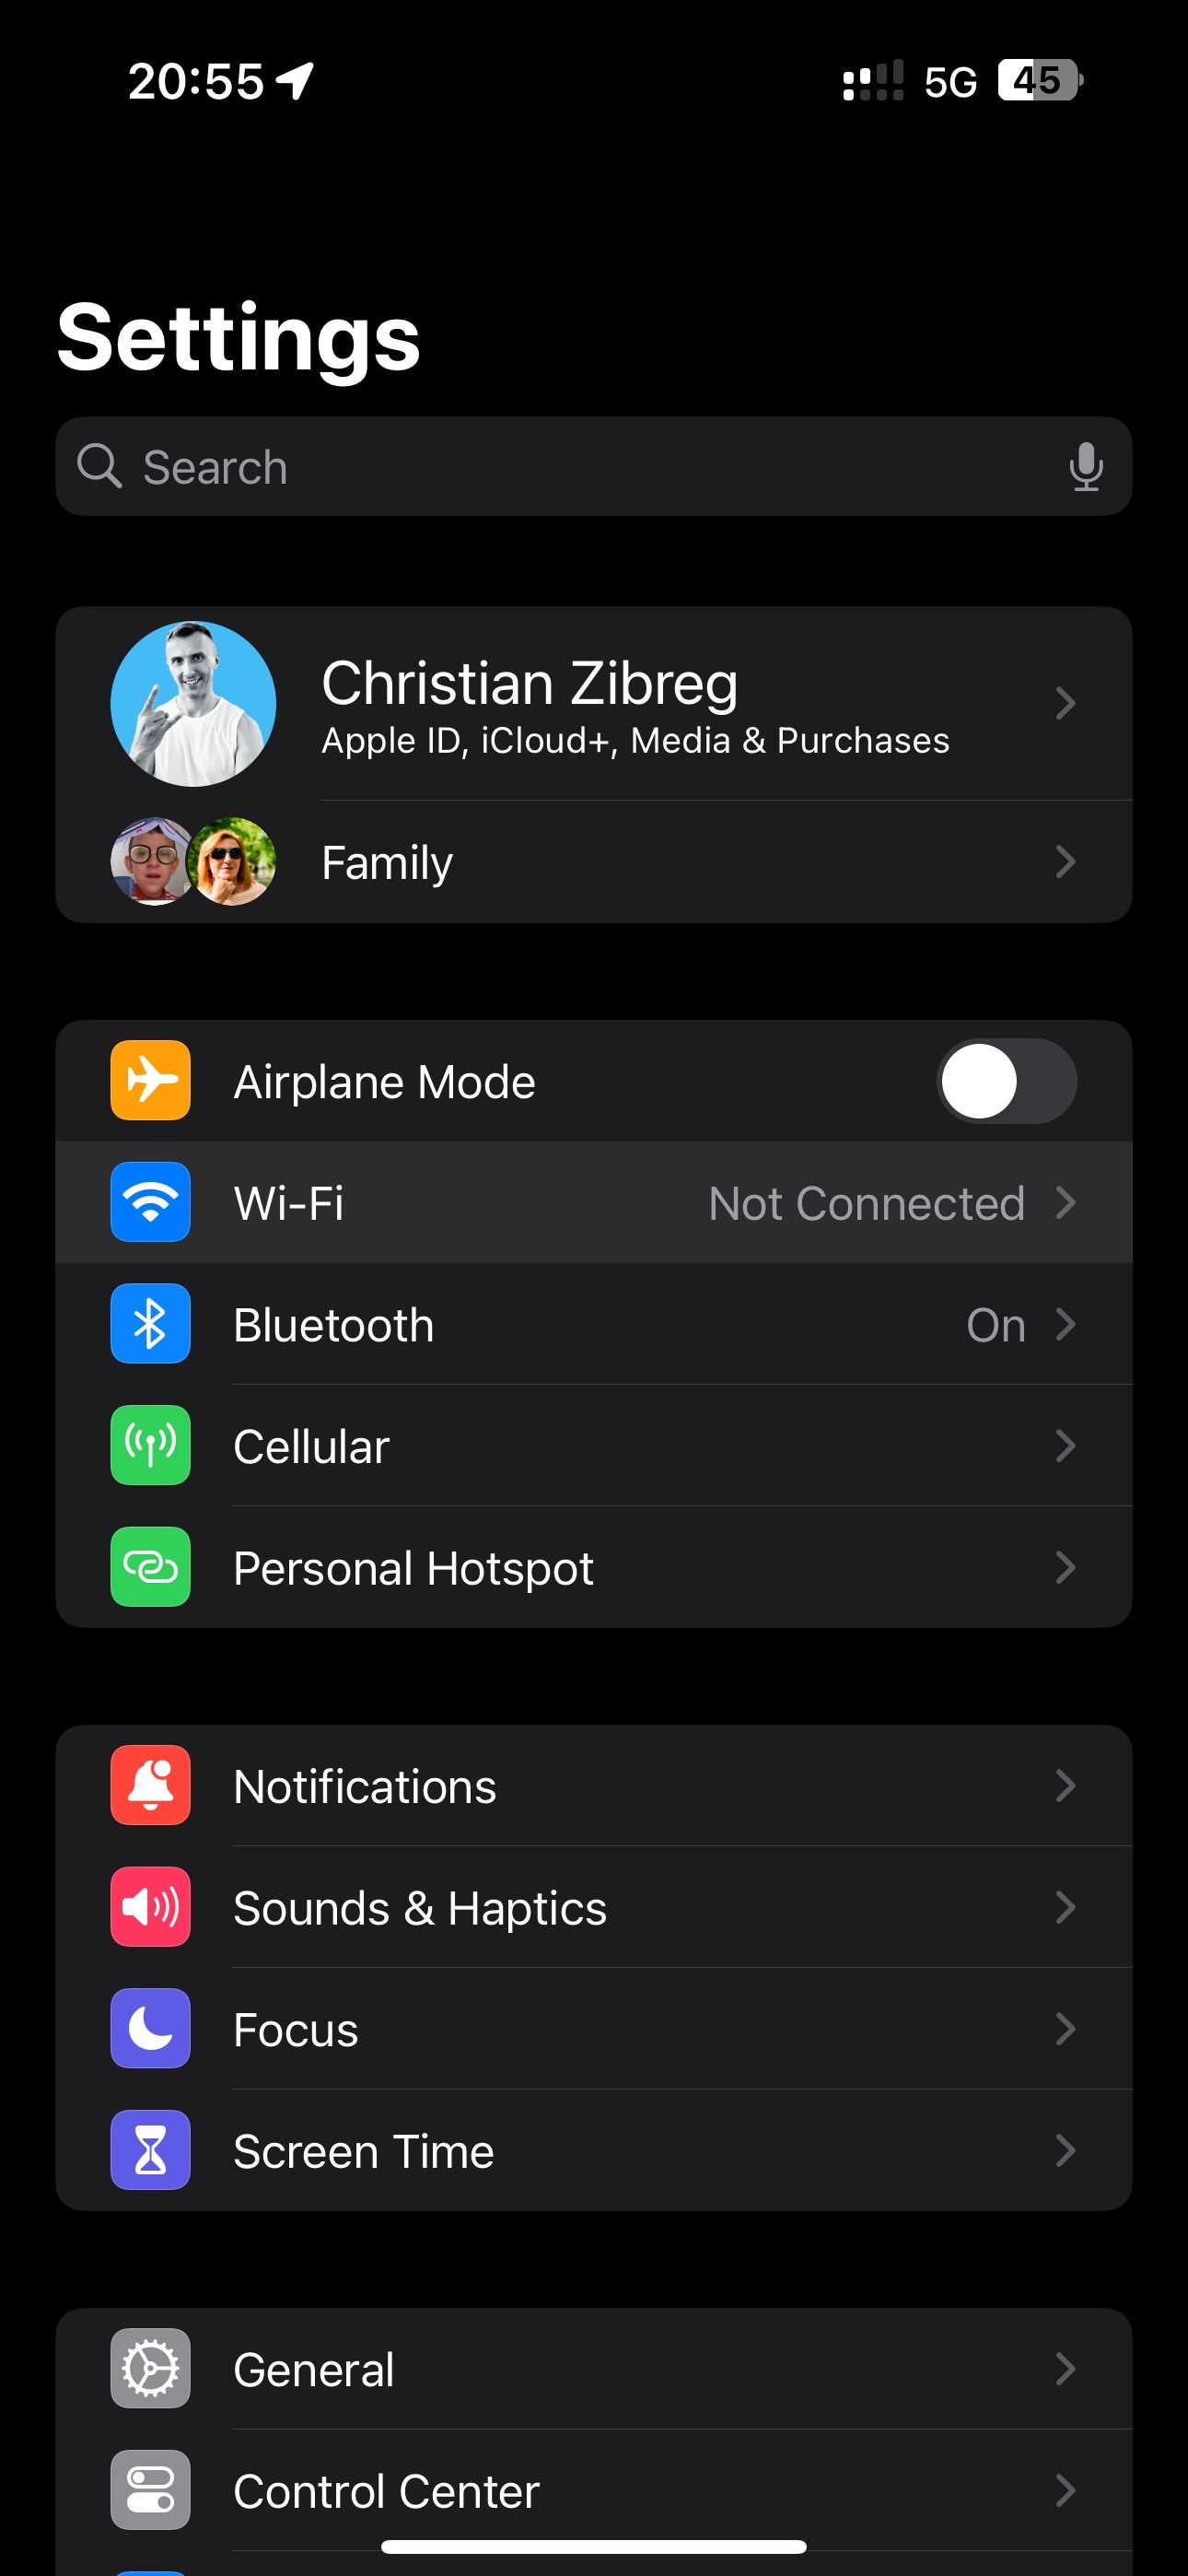 iOS 17 Settings with the Wi-Fi section showing the current network